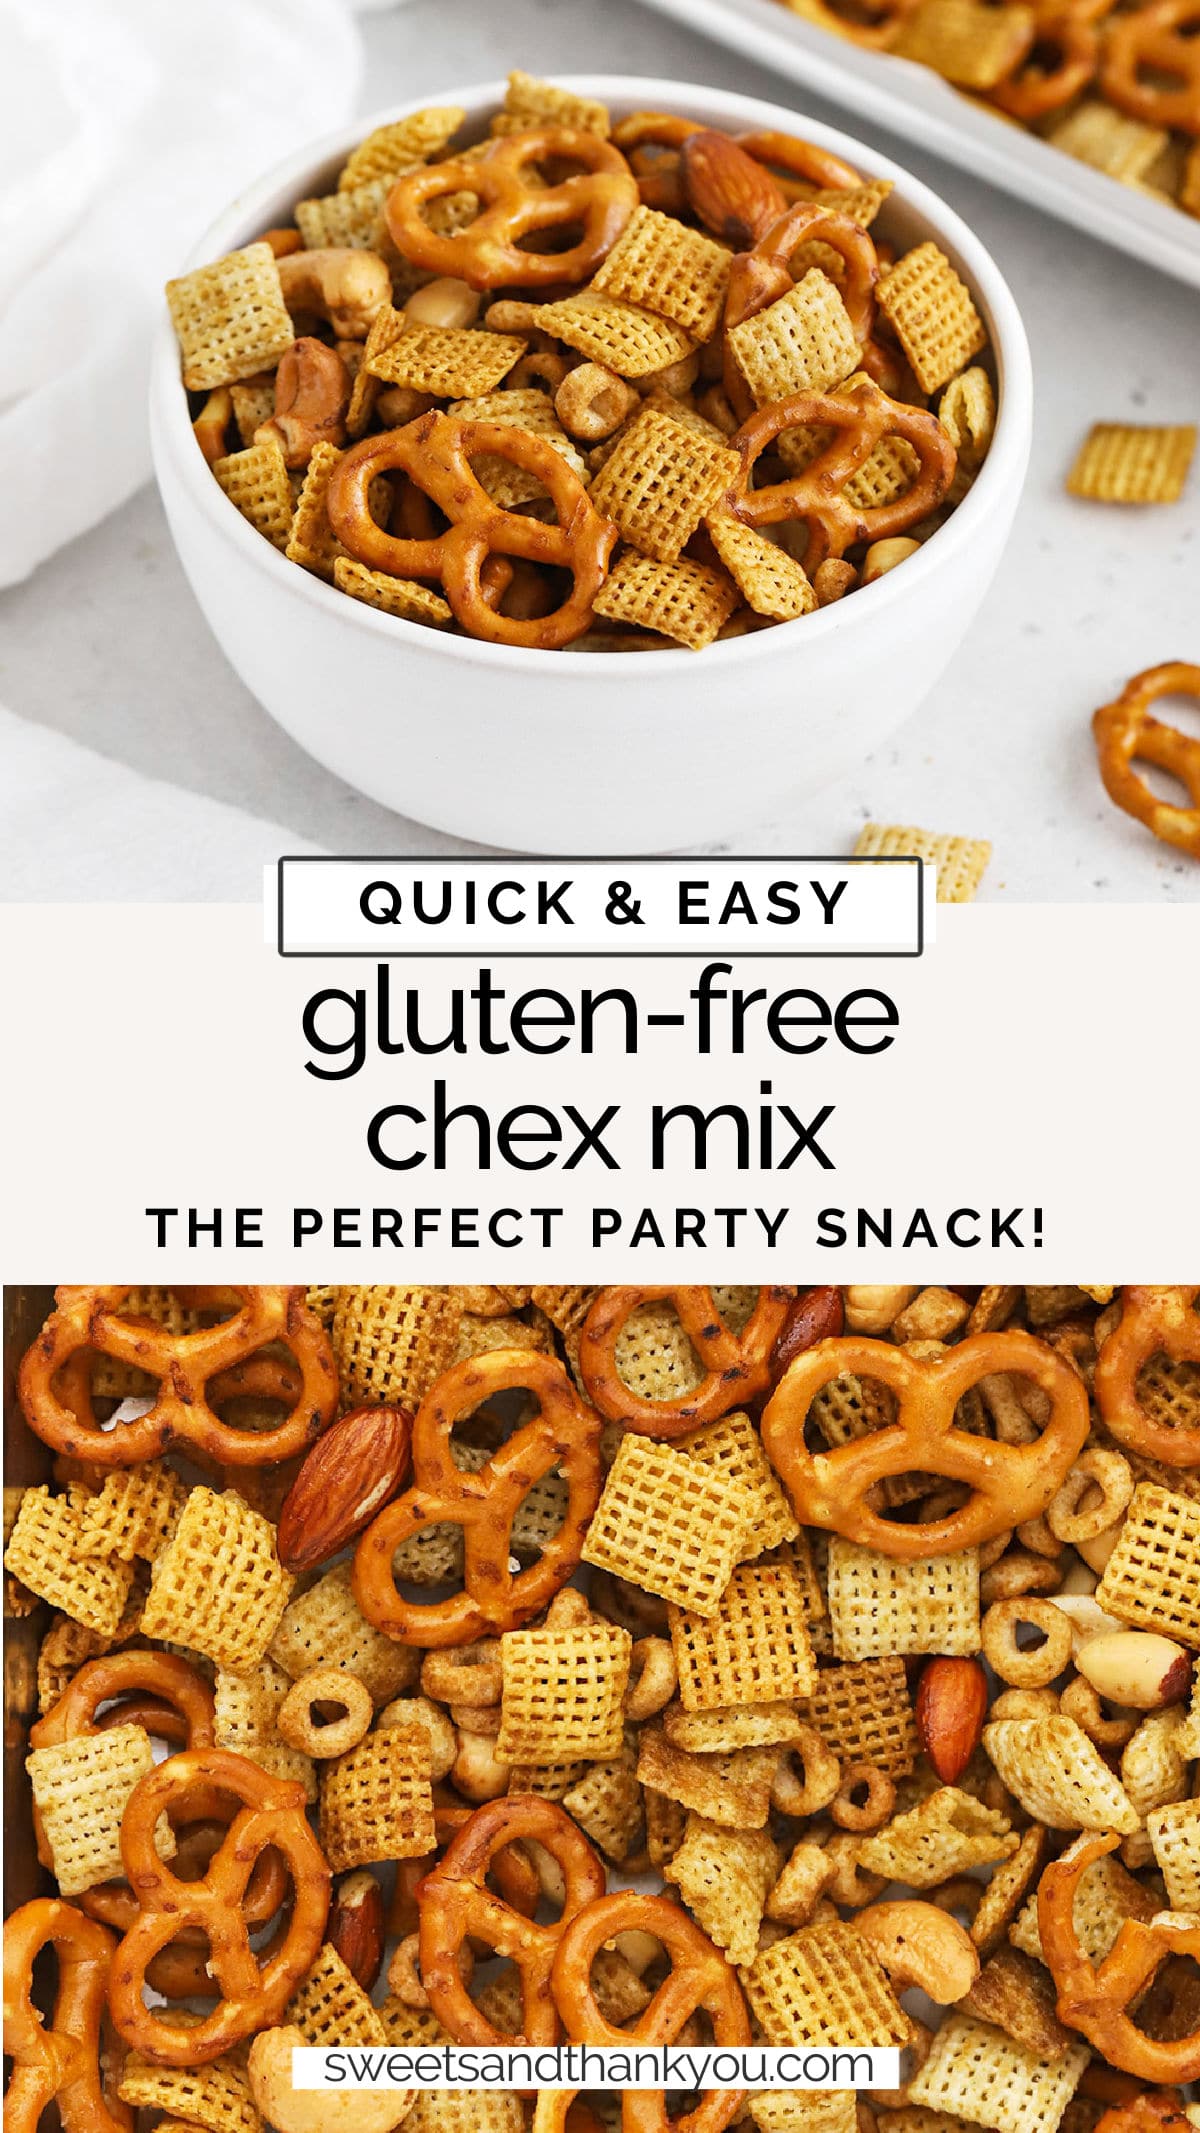 How To Make Gluten-Free Chex Mix - Our savory gluten-free Chex mix recipe is the perfect party snack! You'll love the crunch & flavor! // gluten-free chex party mix // gluten-free savory chex mix // gluten-free party mix // gluten-free Chex Mix for a party / gluten-free party snacks // gluten-free snack recipe